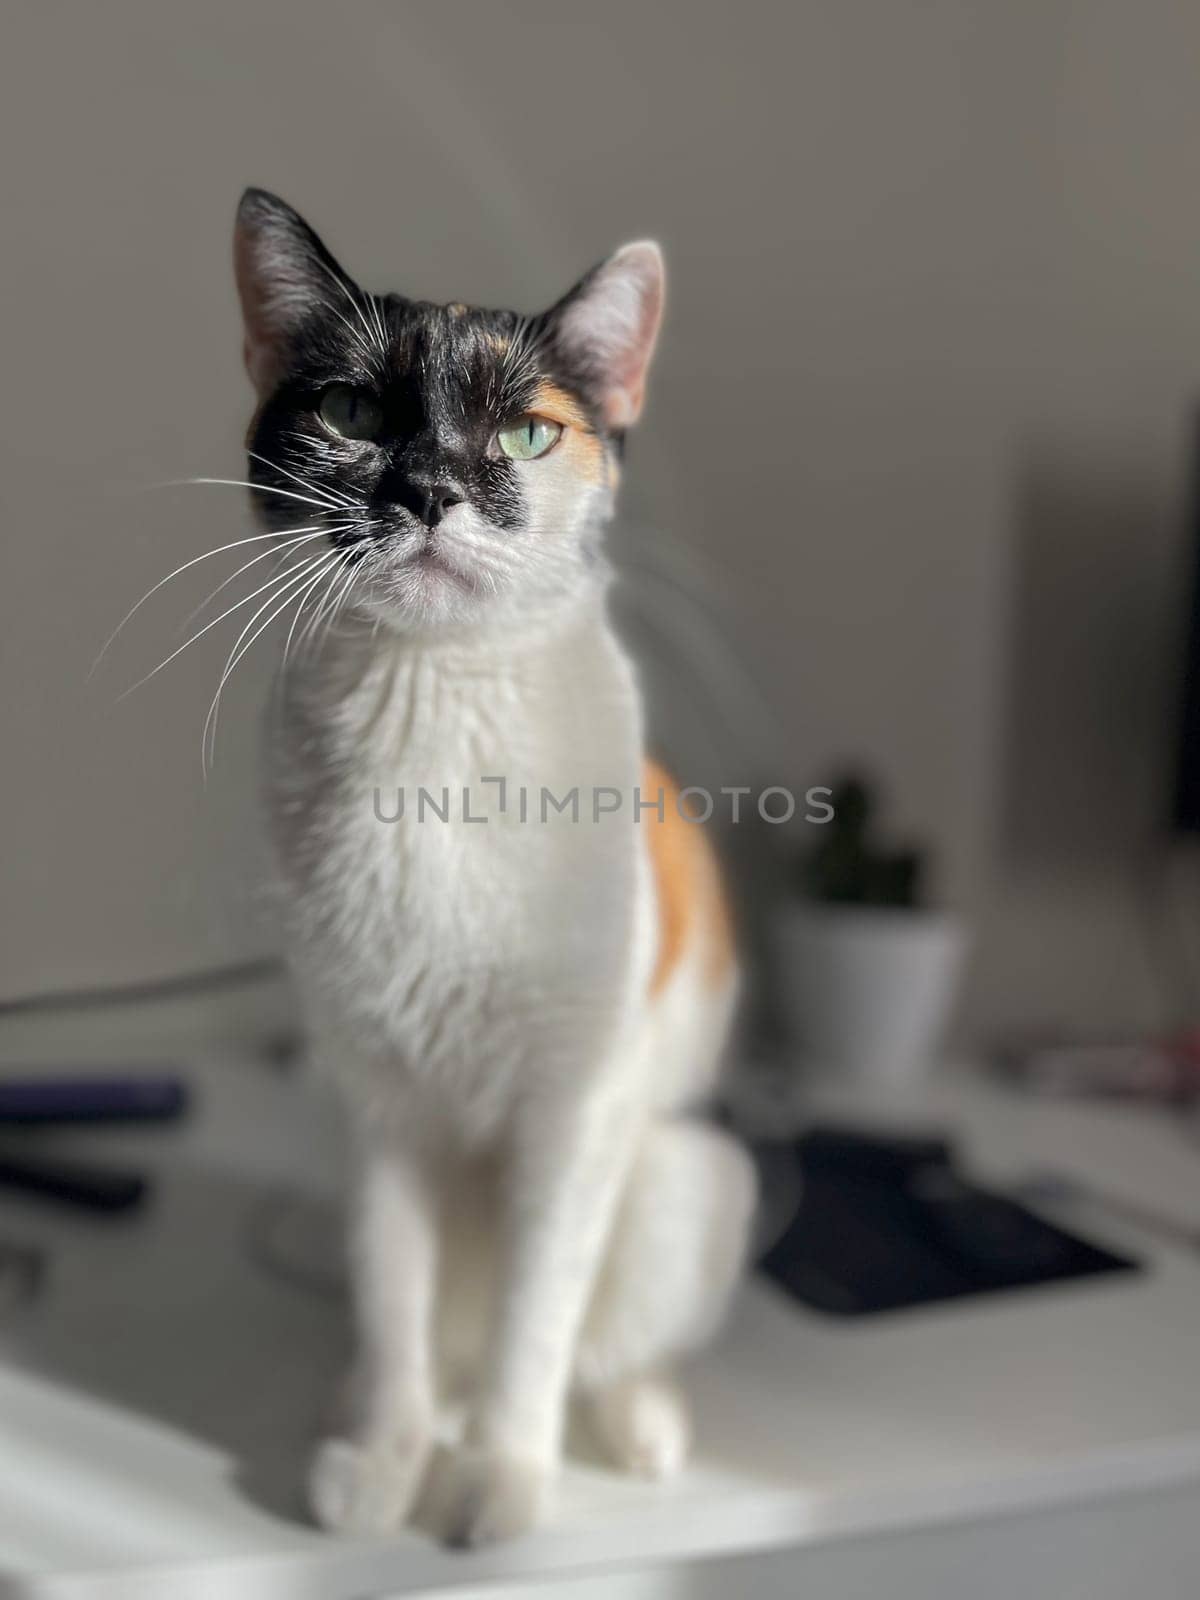 Adorable Calico Cat Sitting on a White Table Looking at the Camera by Pukhovskiy